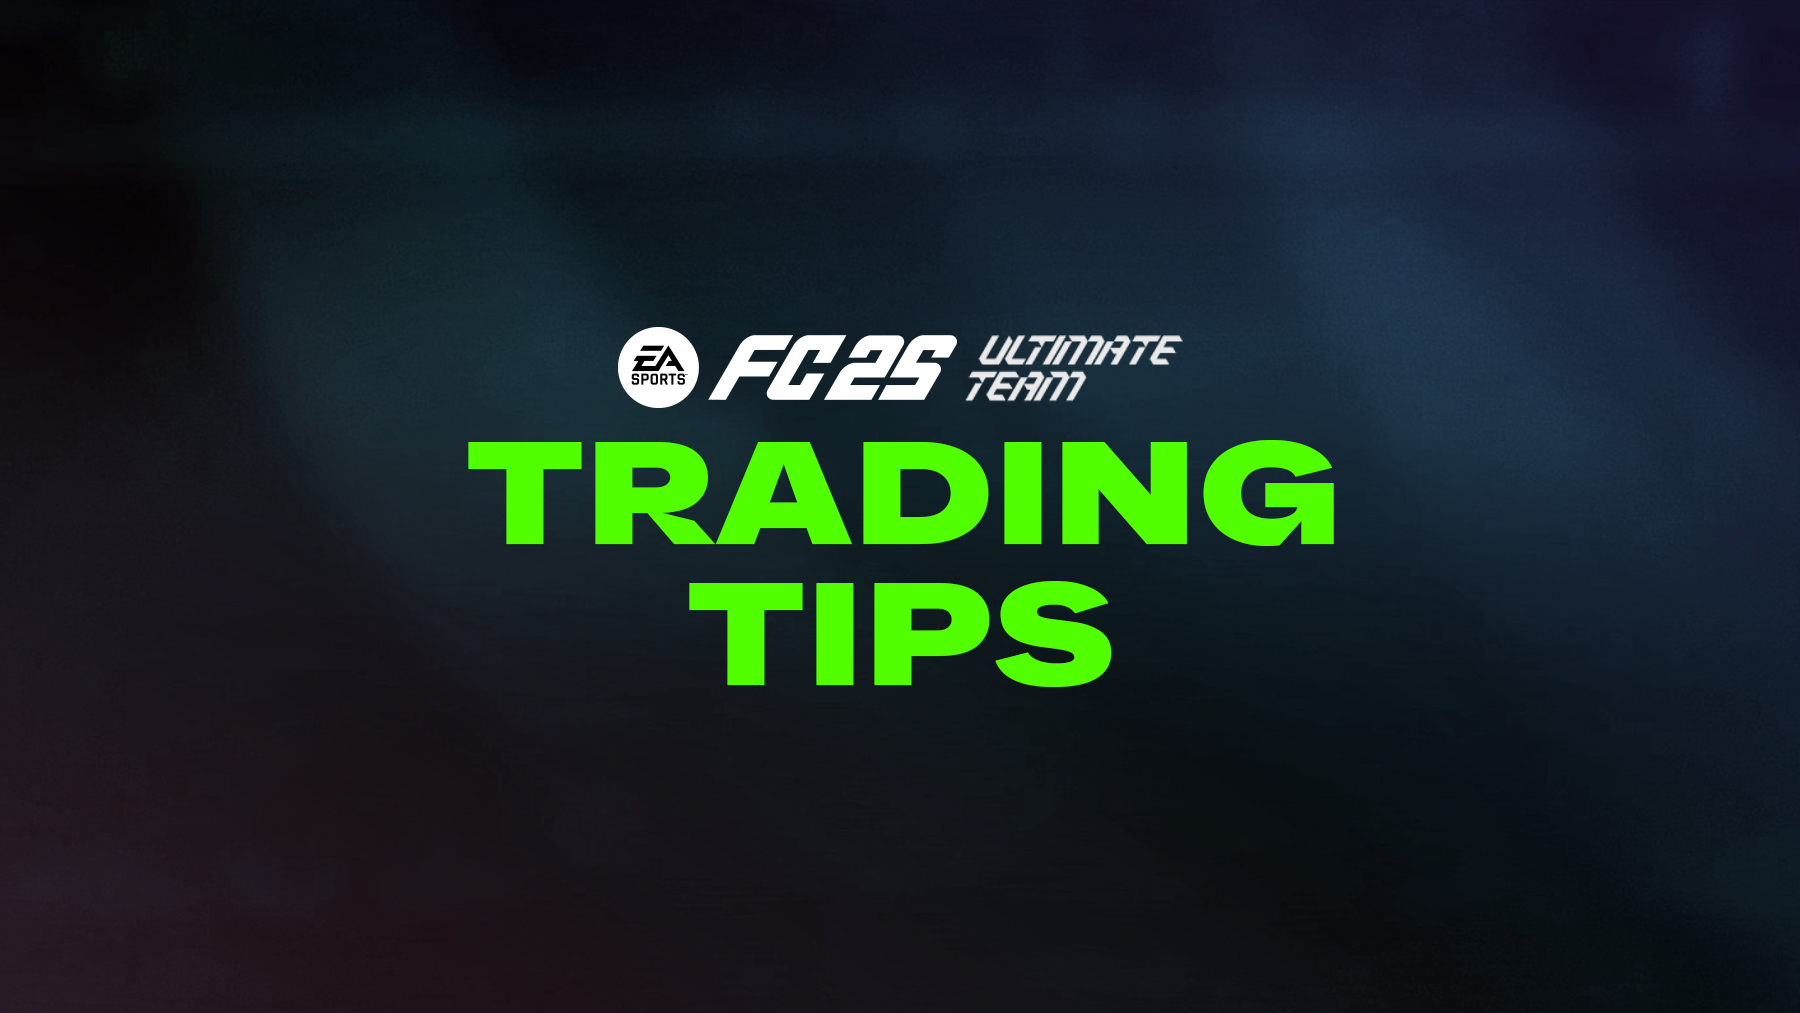 FC 25 Trading Tips